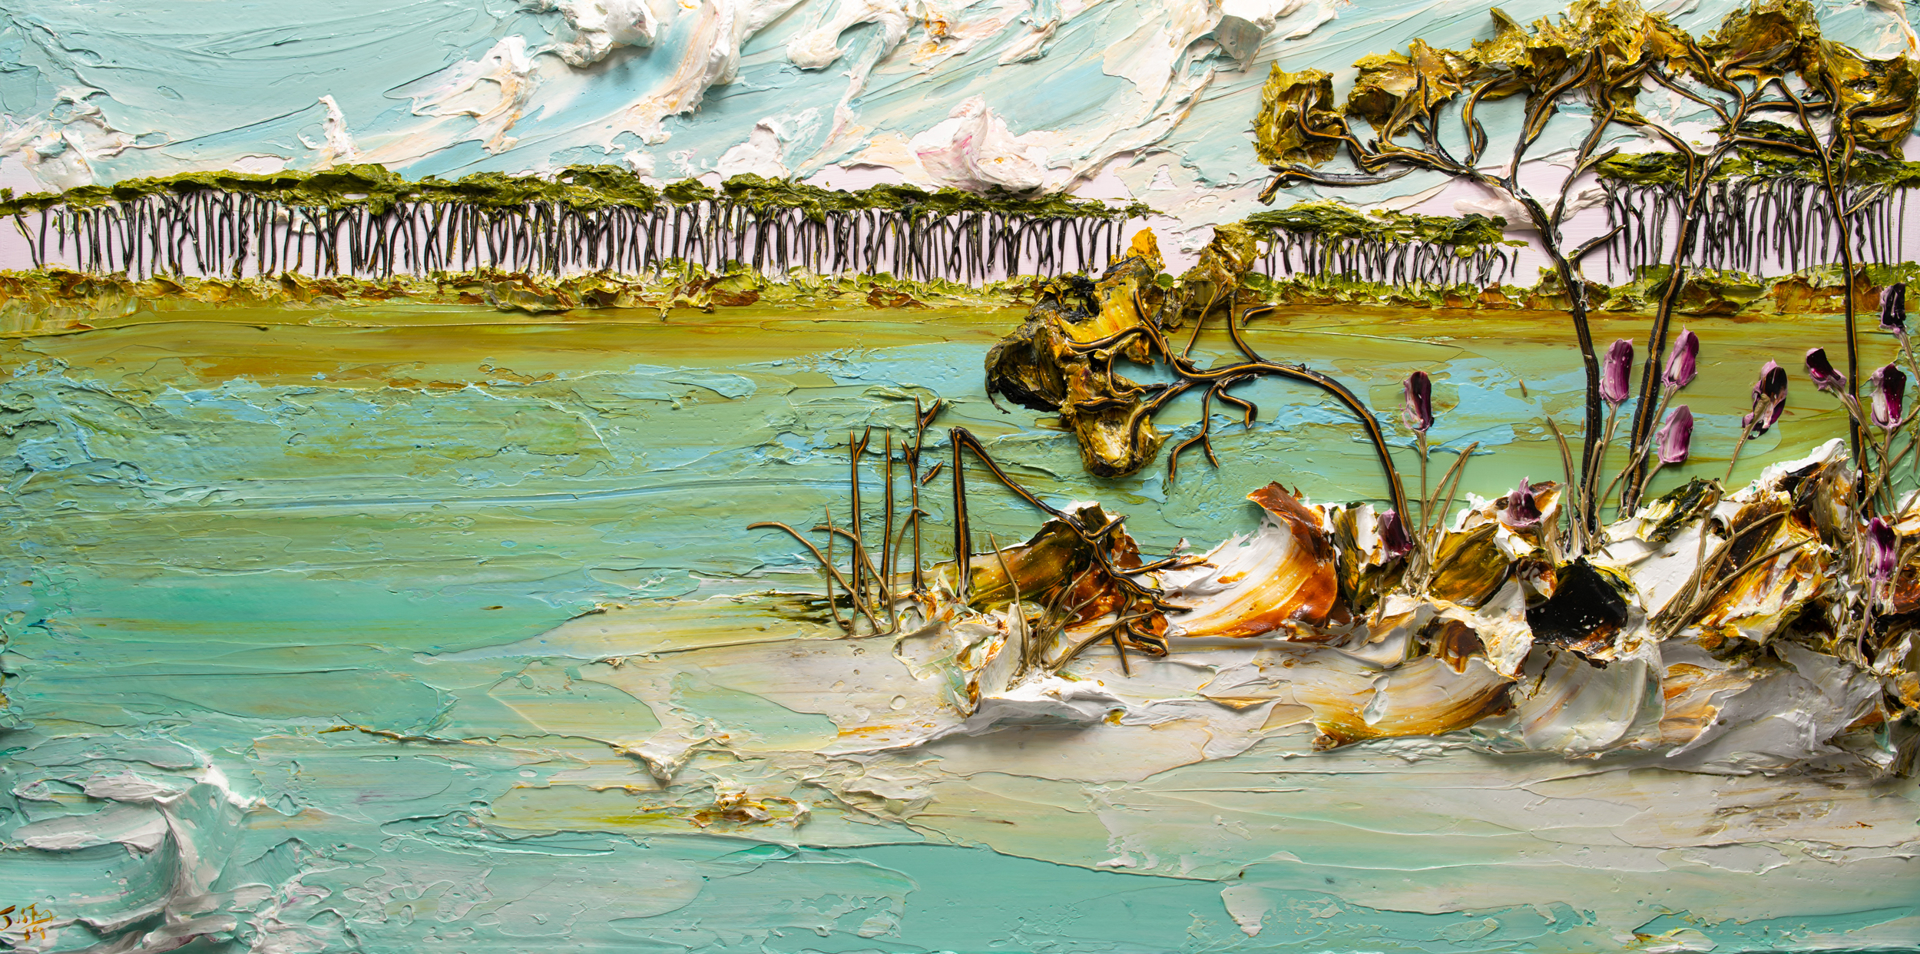 LAKESCAPE-LS-60X30-2019-166 by JUSTIN GAFFREY